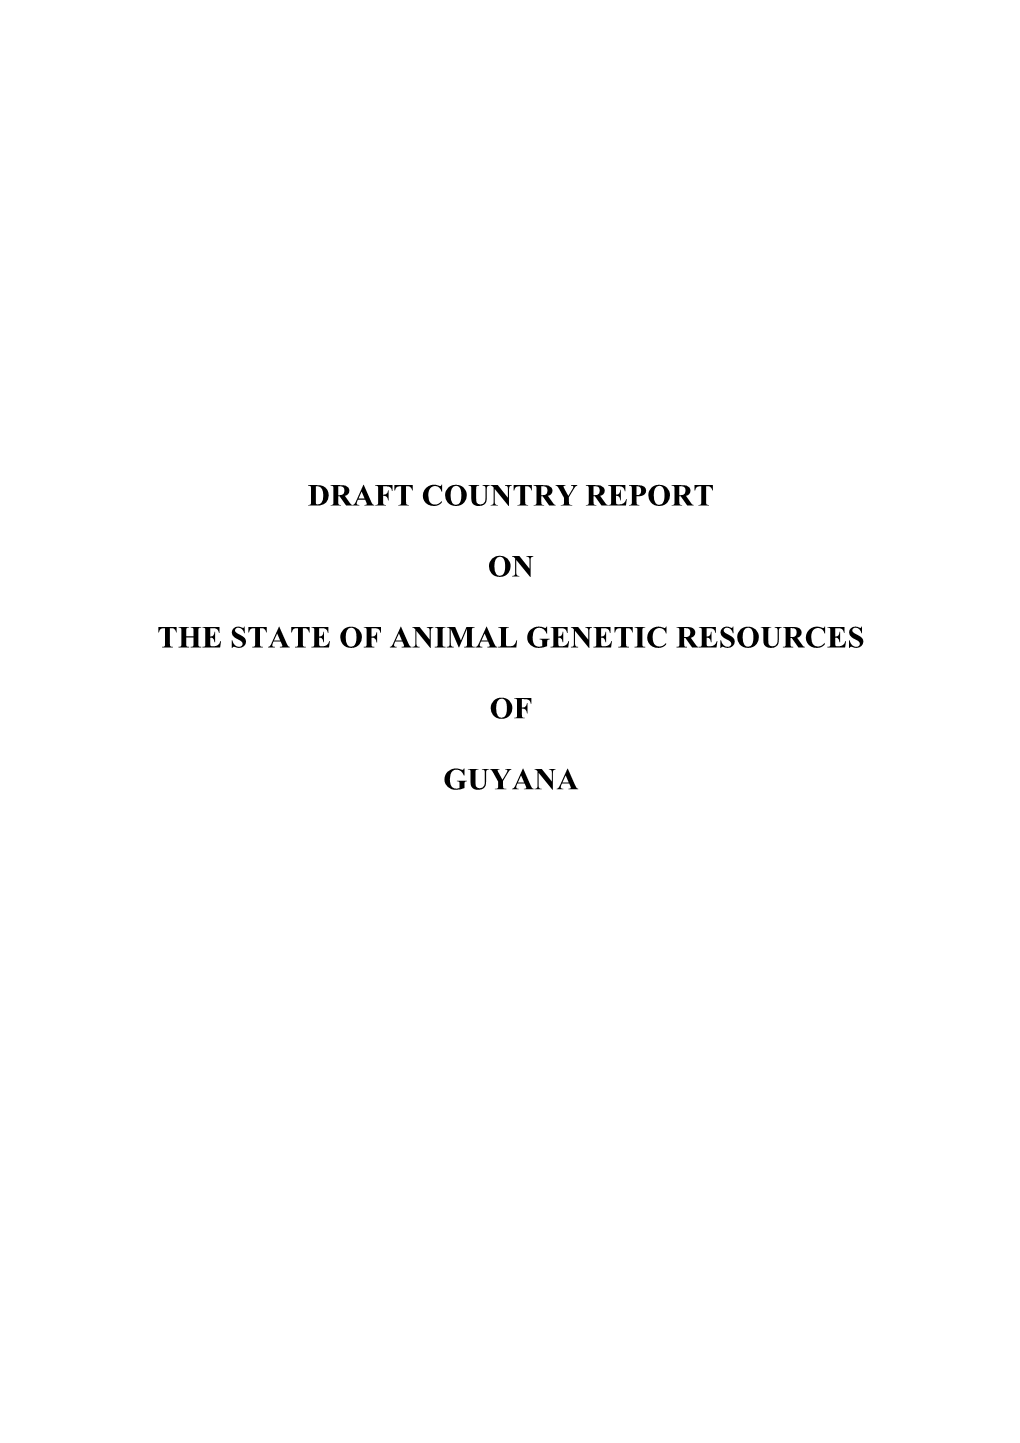 Draft Country Report on the State of Animal Genetic Resources of Guyana